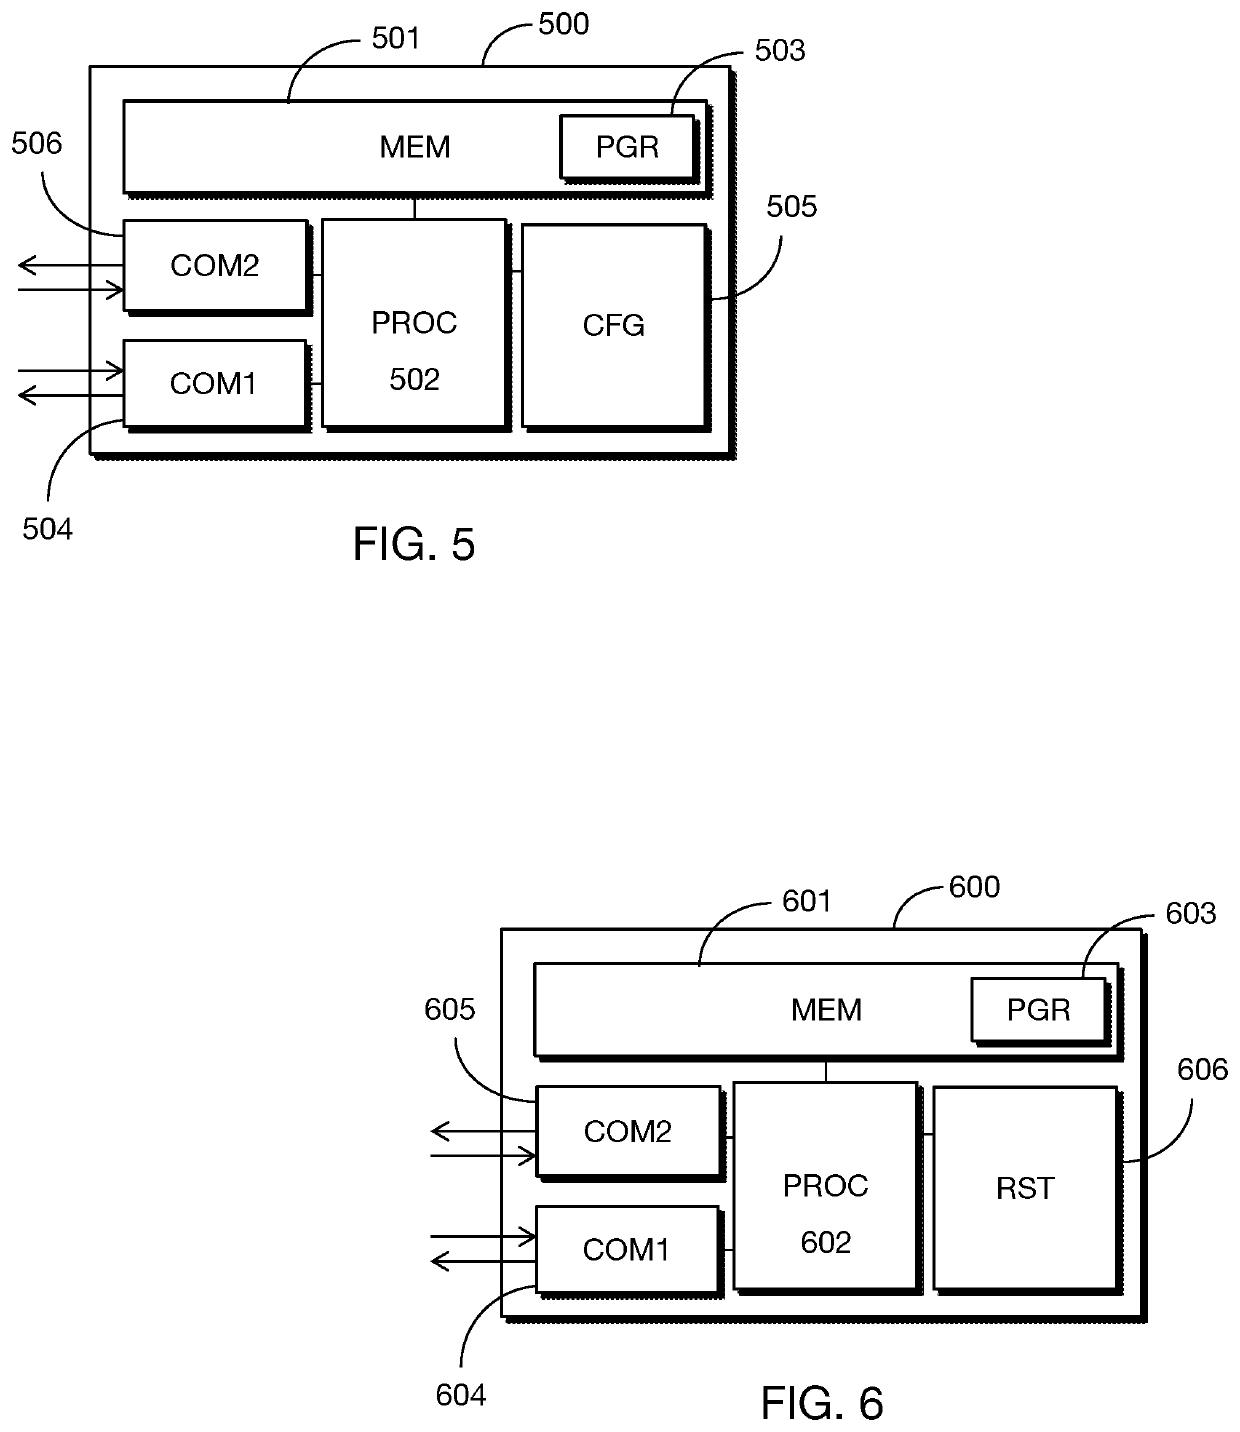 Method for establishing a communication with an interactive server